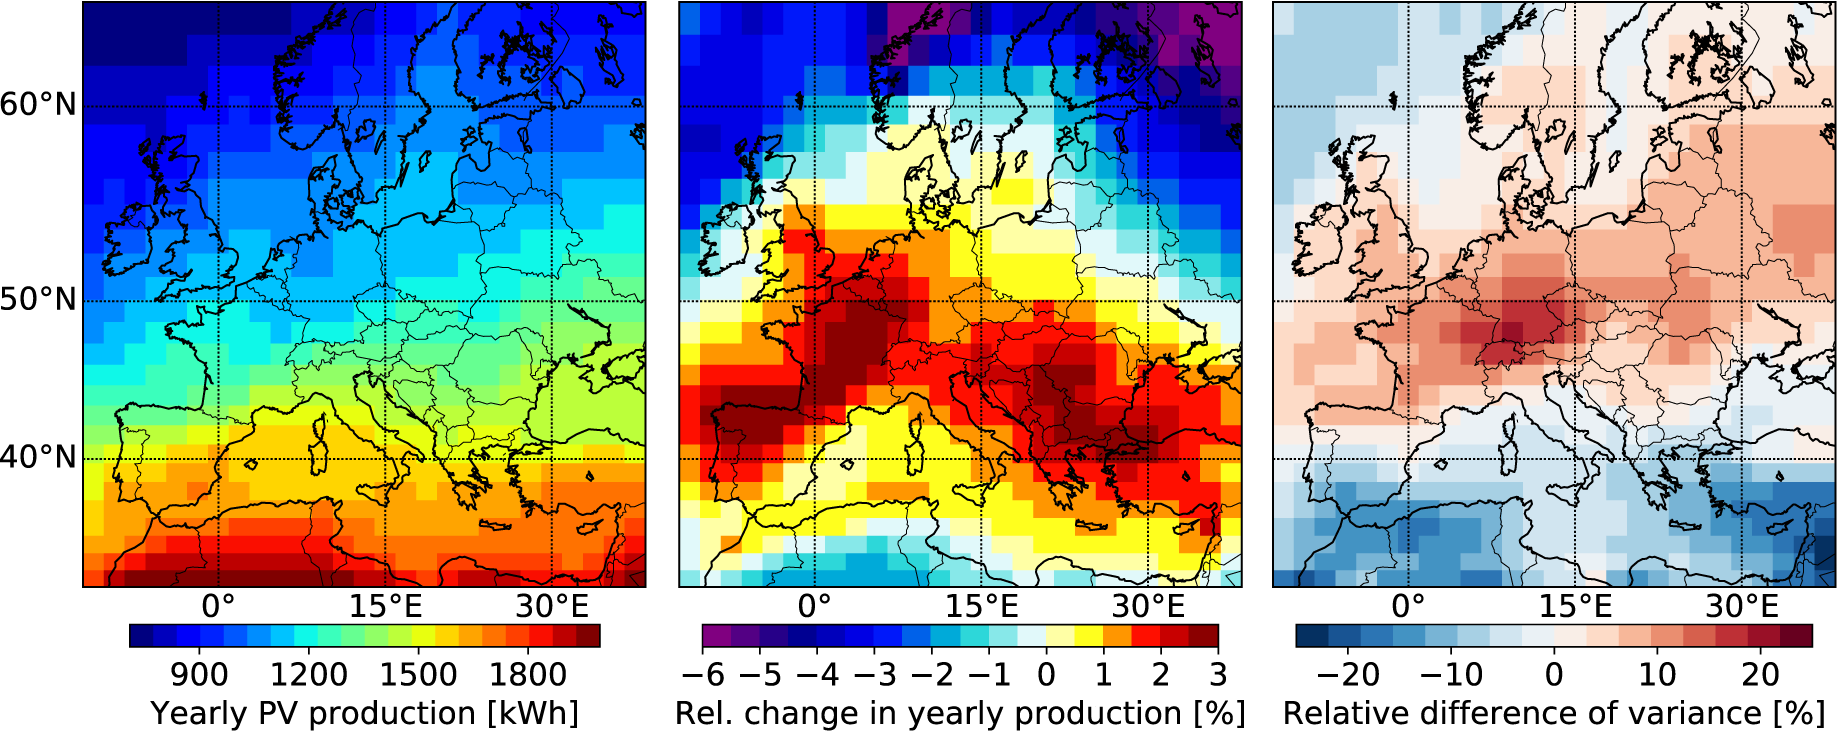 Results for present yearly total PV potential and future relative change and variance compared to the present under the RCP8.5 climate change scenario. Maps show the ensemble mean of the CMIP5 models of the total PV potential (a) for the present (2007–2027), (b) relative difference in yearly sum of produced power, and (c) intra-annual (seasonal) variance between the present (2007–2027) and future (2060–2080) time periods. Adapted from Müller, Folini, Wild and Pfenninger (2019).